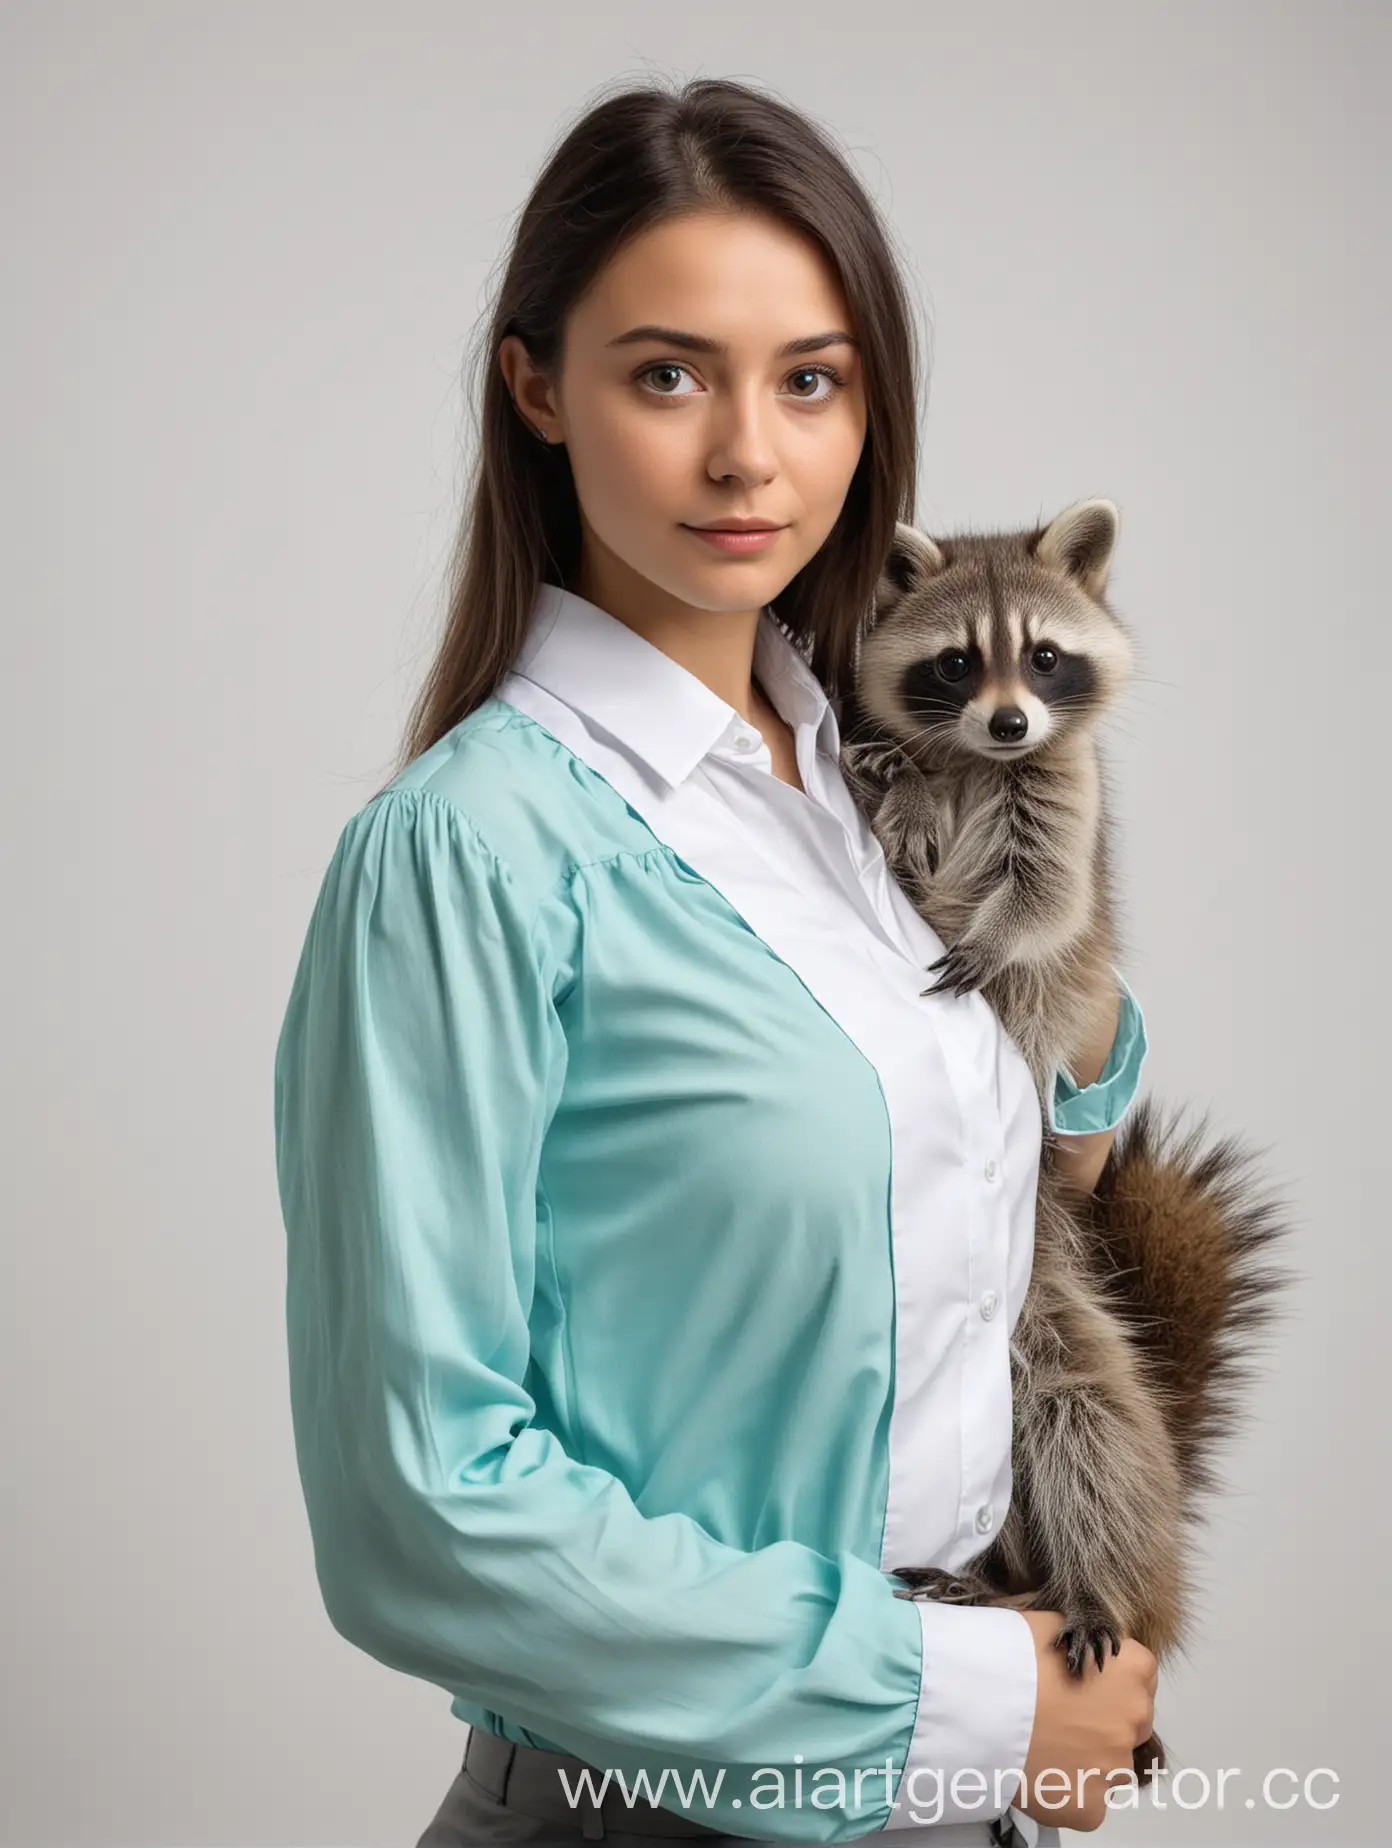 Intelligent-Graduate-Teacher-Lawyer-in-Turquoise-Shirt-with-Raccoon-Print